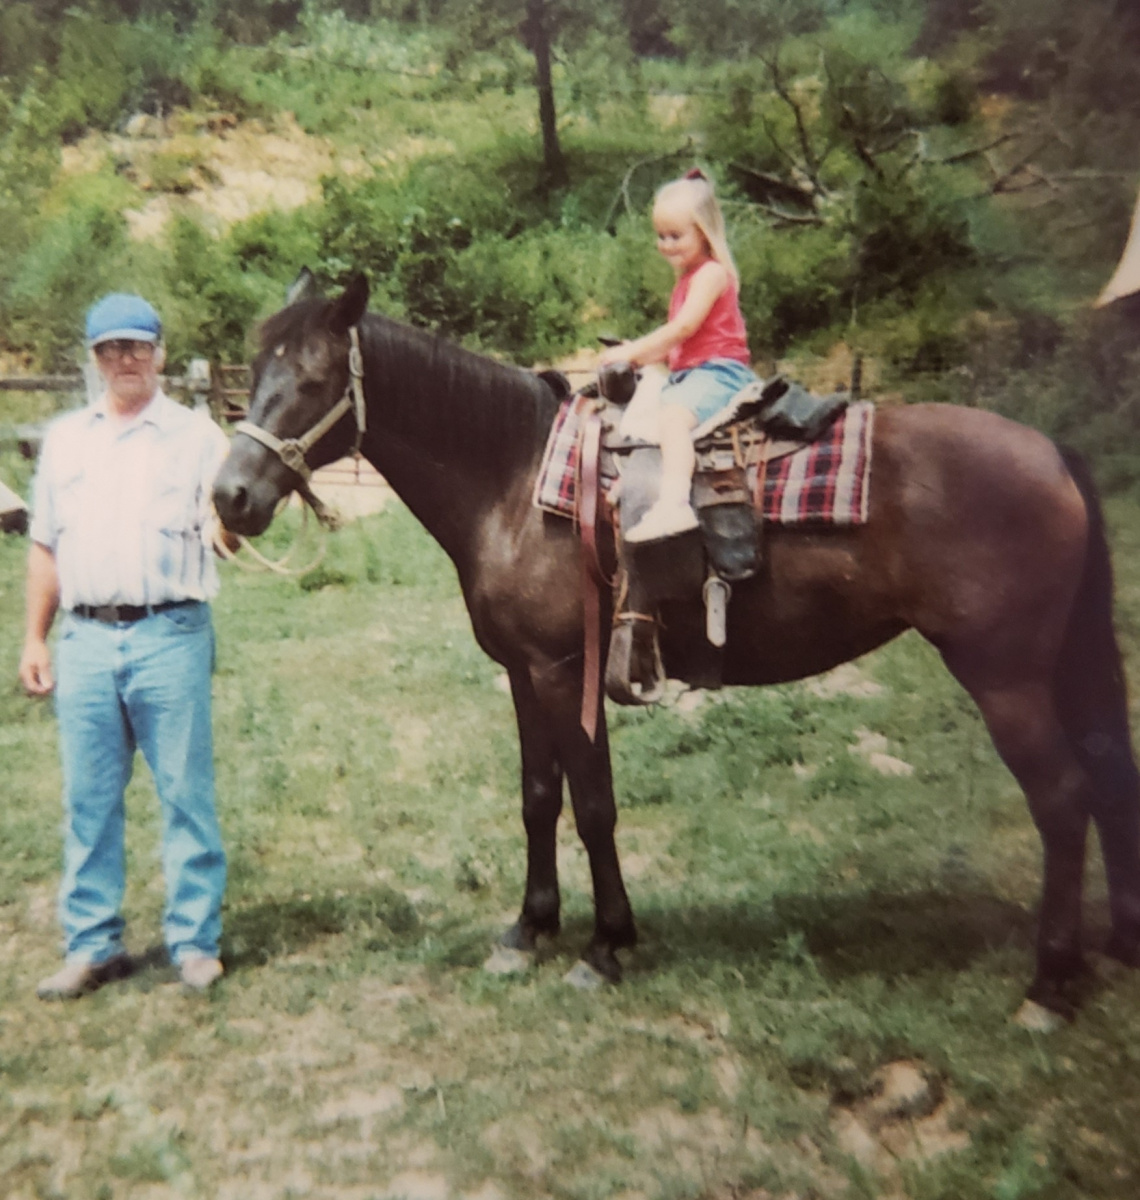 Man standing next to horse with girl on back. 